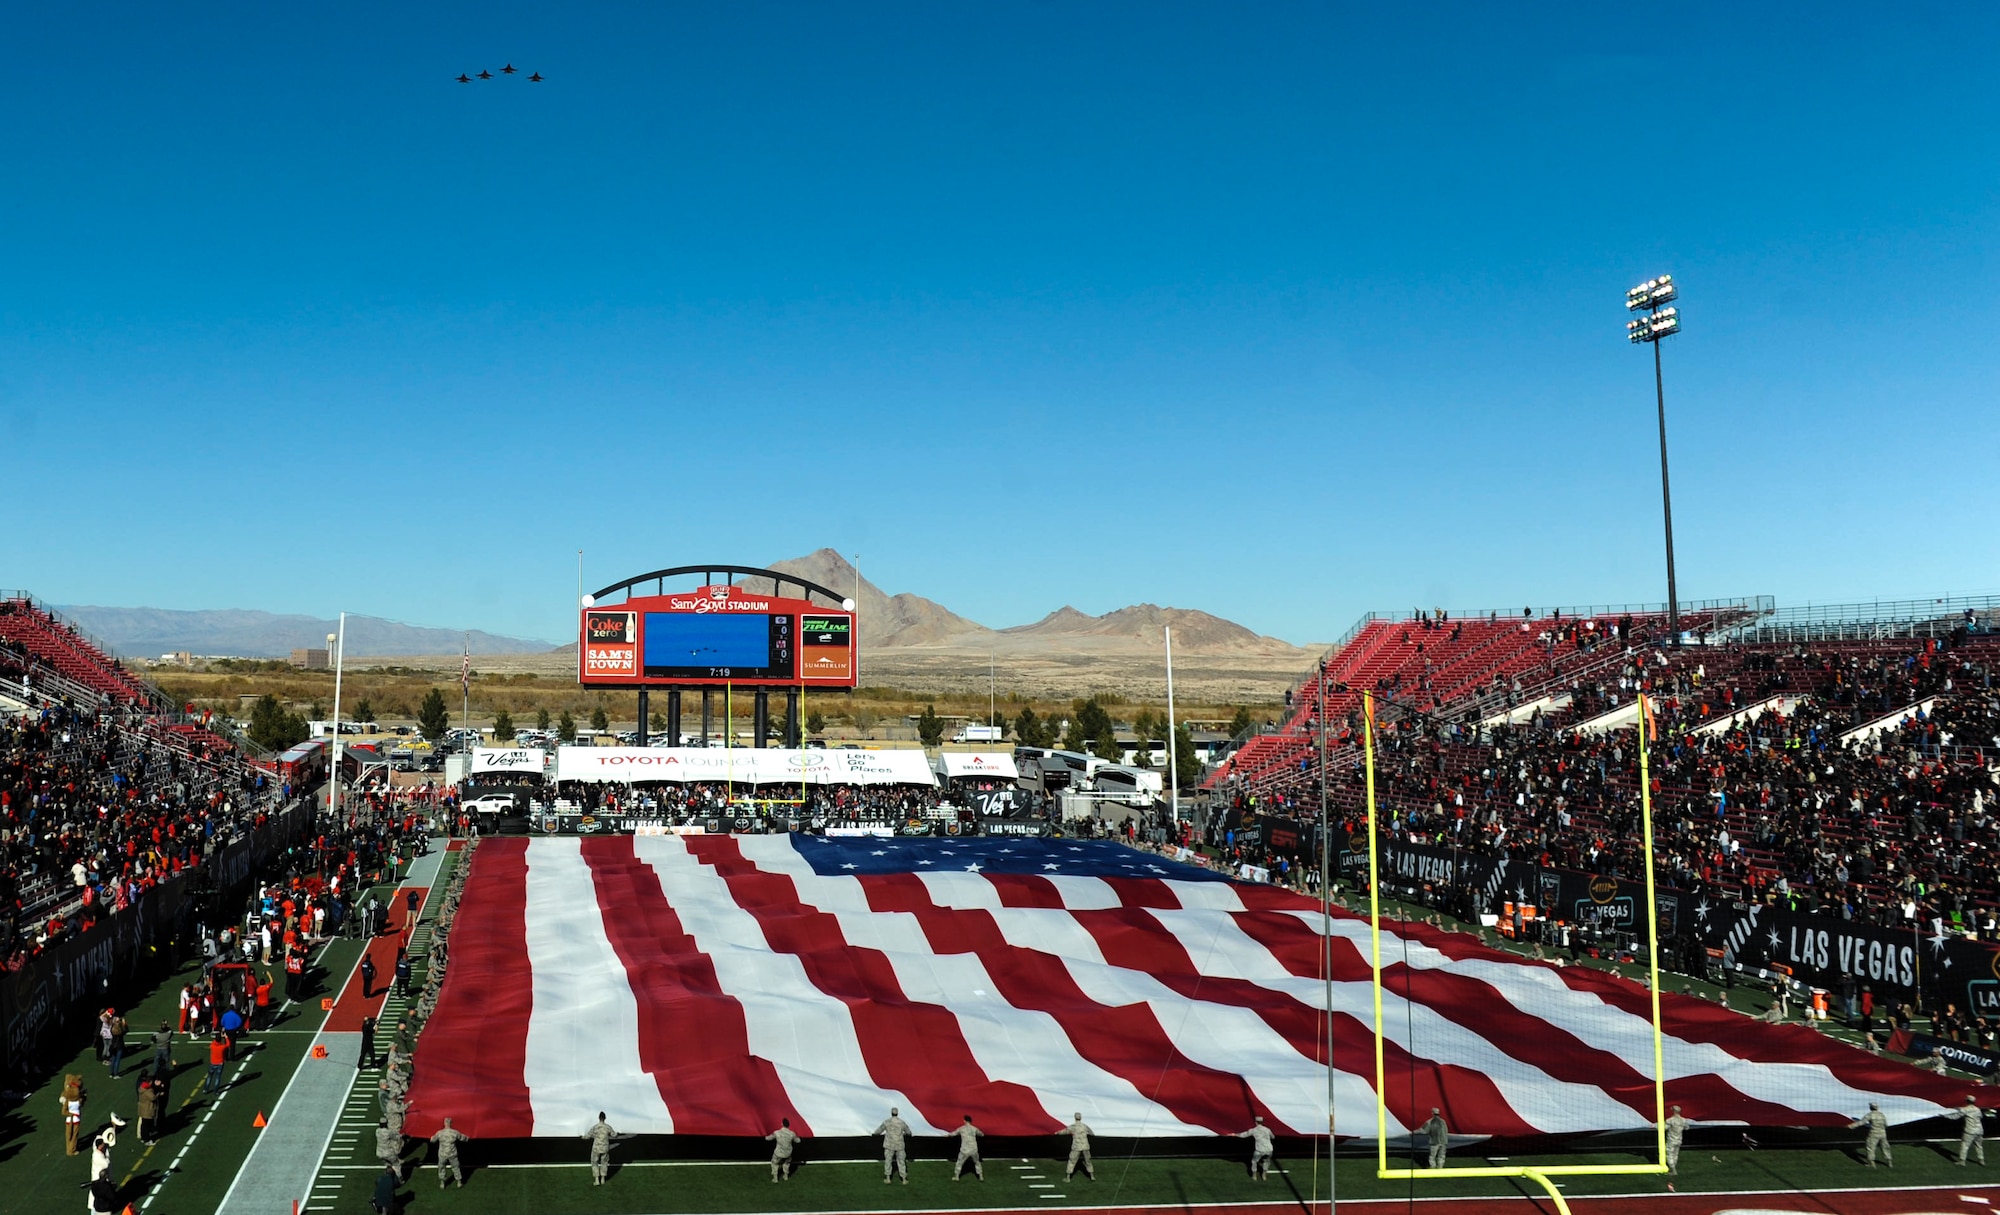 Four F-16 Fighting Falcons perform a fly-over as Airmen from Nellis and Creech Air Force Bases hold the American flag at Sam Boyd Stadium during the Las Vegas Bowl, Dec. 17, 2016. The F-16s flew over the stadium as the National Anthem played before the game began. (U.S. Air Force photo by Airman 1st Class Kevin Tanenbaum/Released)